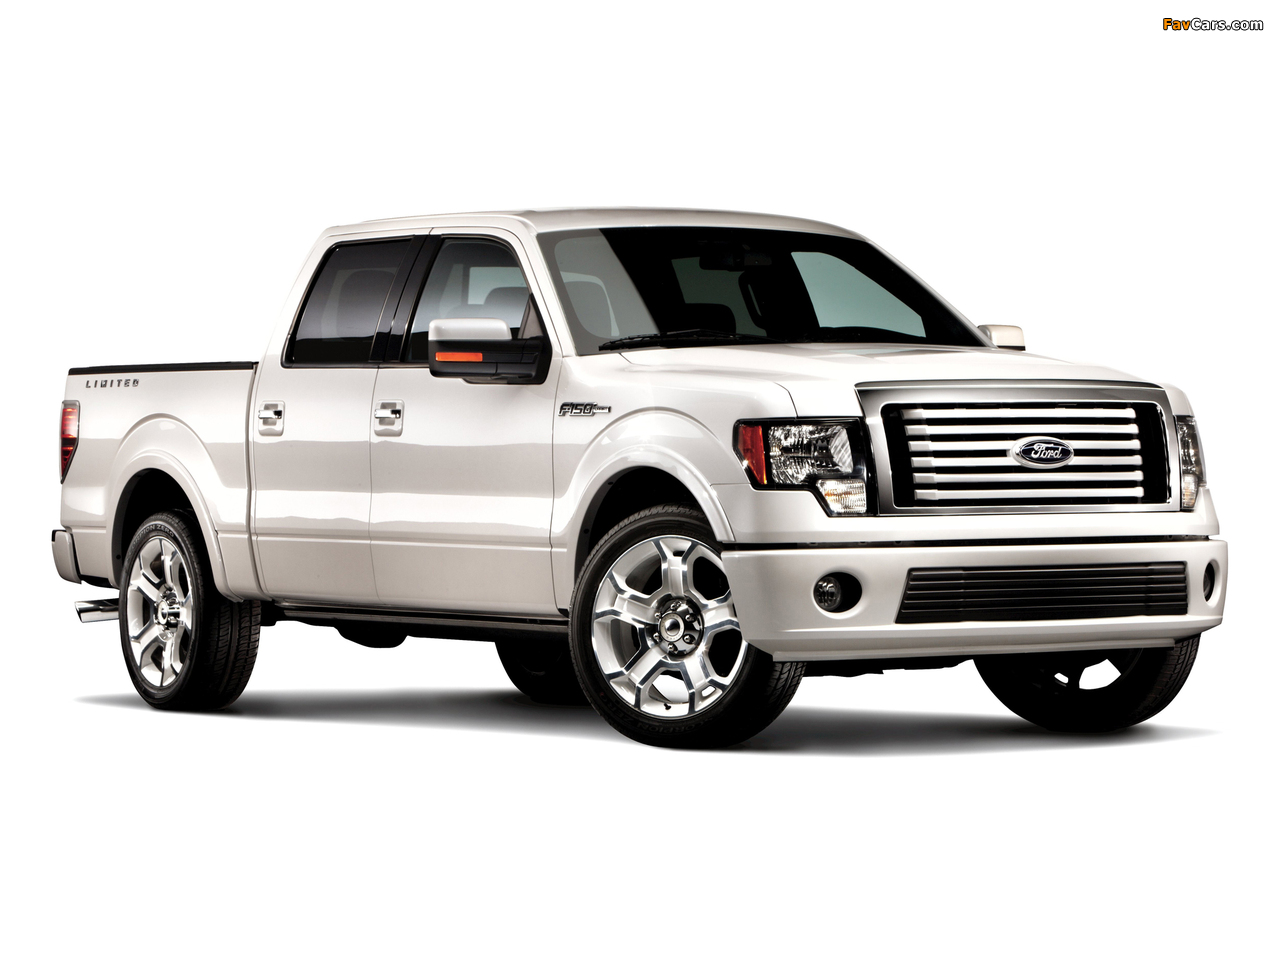 Ford F-150 Lariat Limited 2010 pictures (1280 x 960)